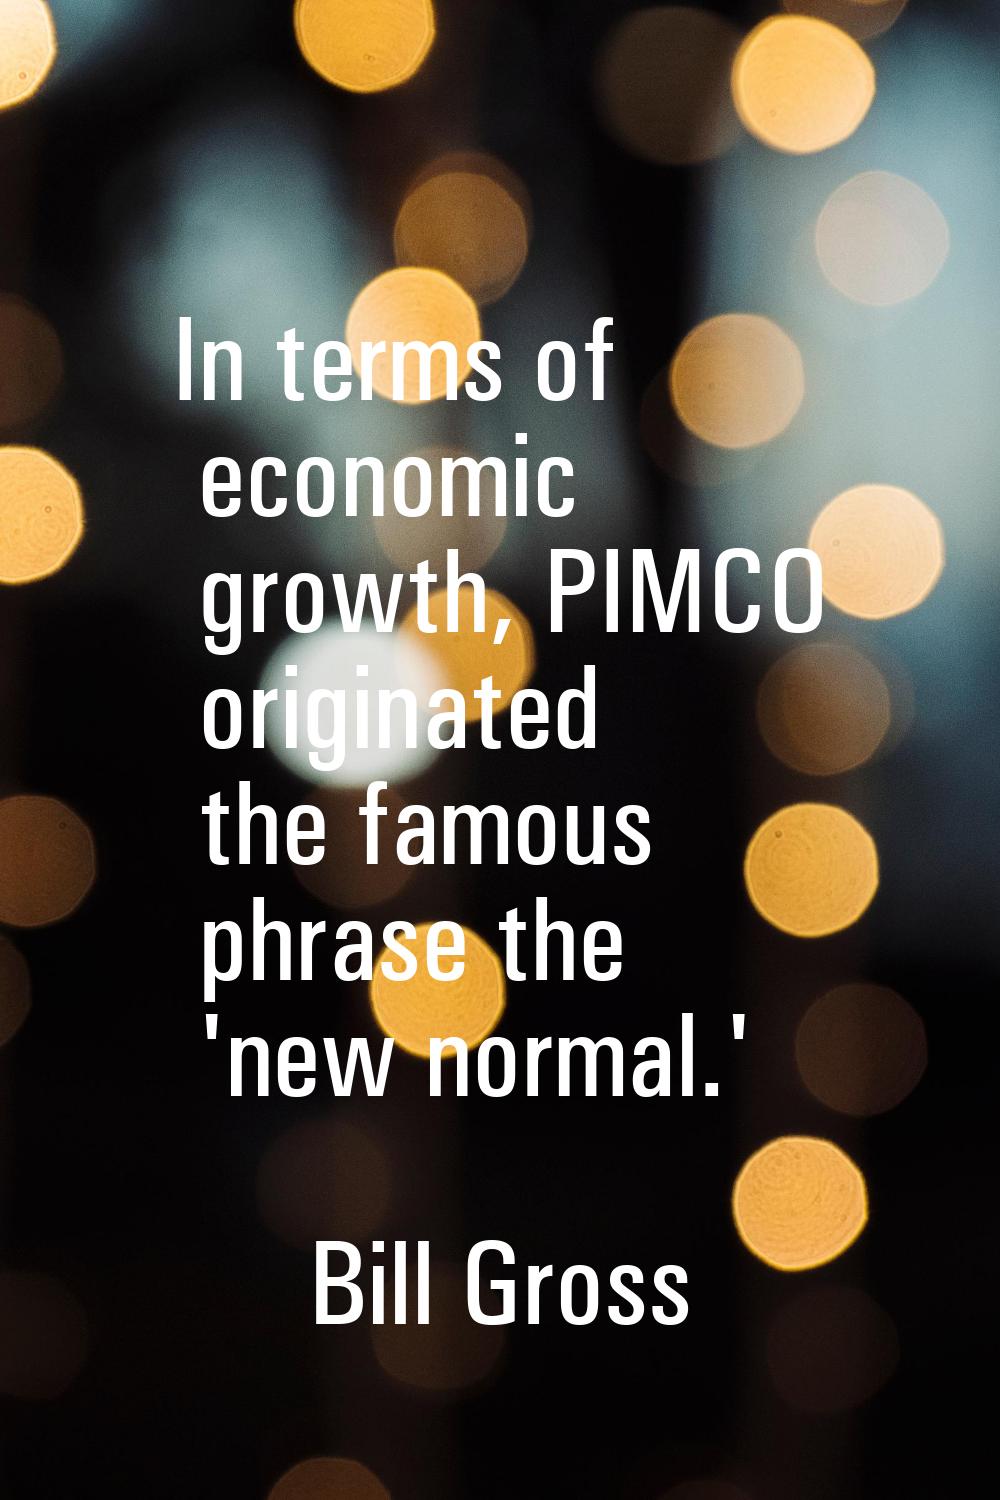 In terms of economic growth, PIMCO originated the famous phrase the 'new normal.'